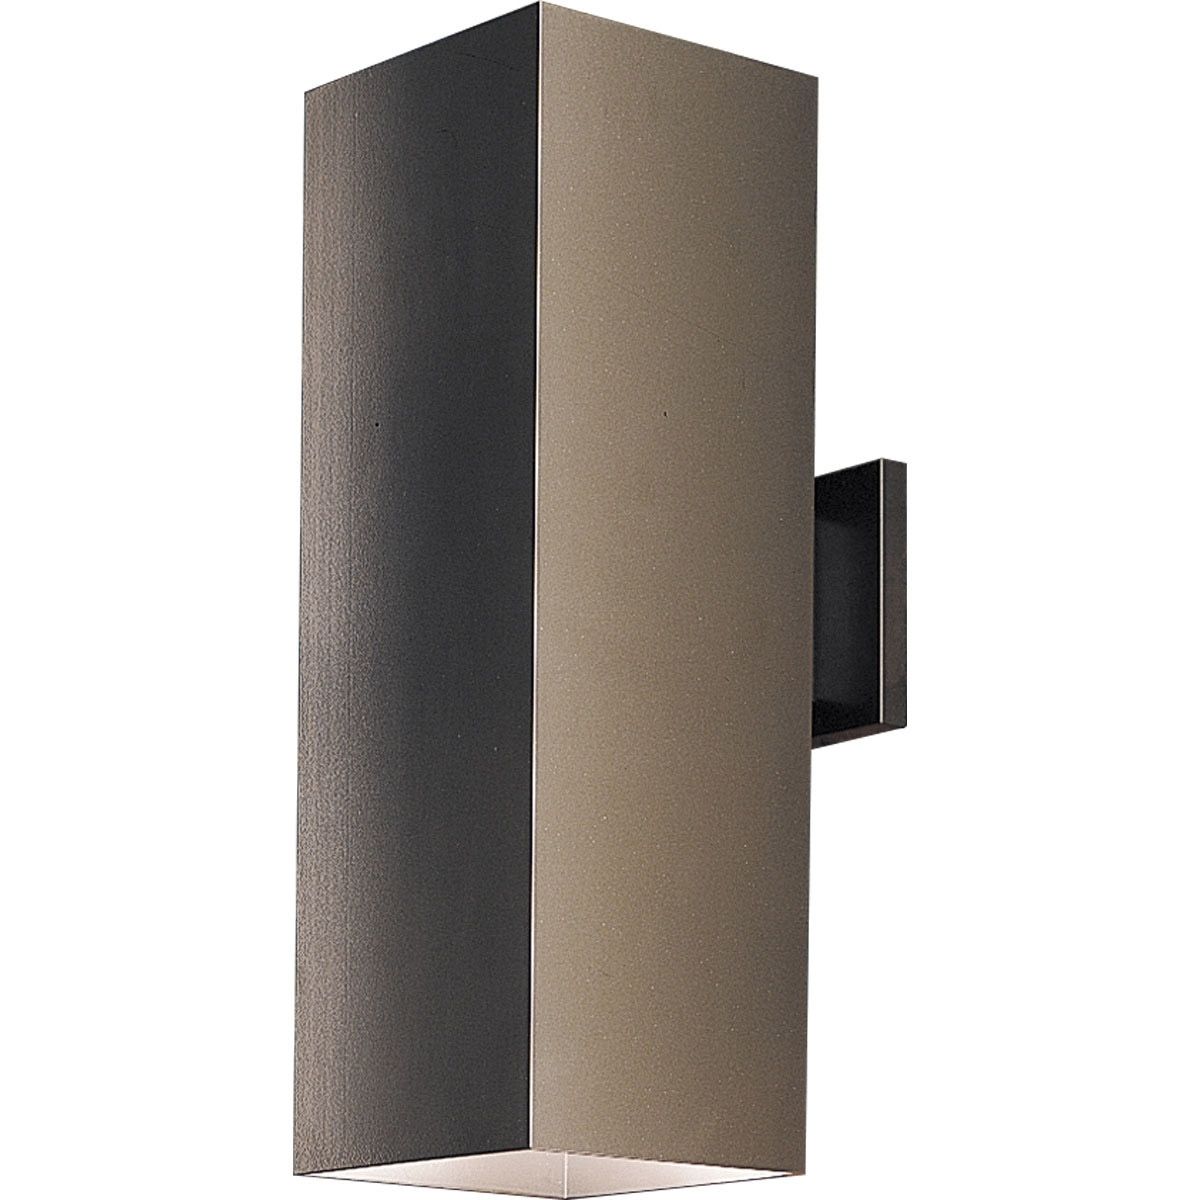 Current Lighting P5644 20 Square Outdoor Wall Mount Fixture In Outdoor Wall Mount Lighting Fixtures (View 1 of 20)